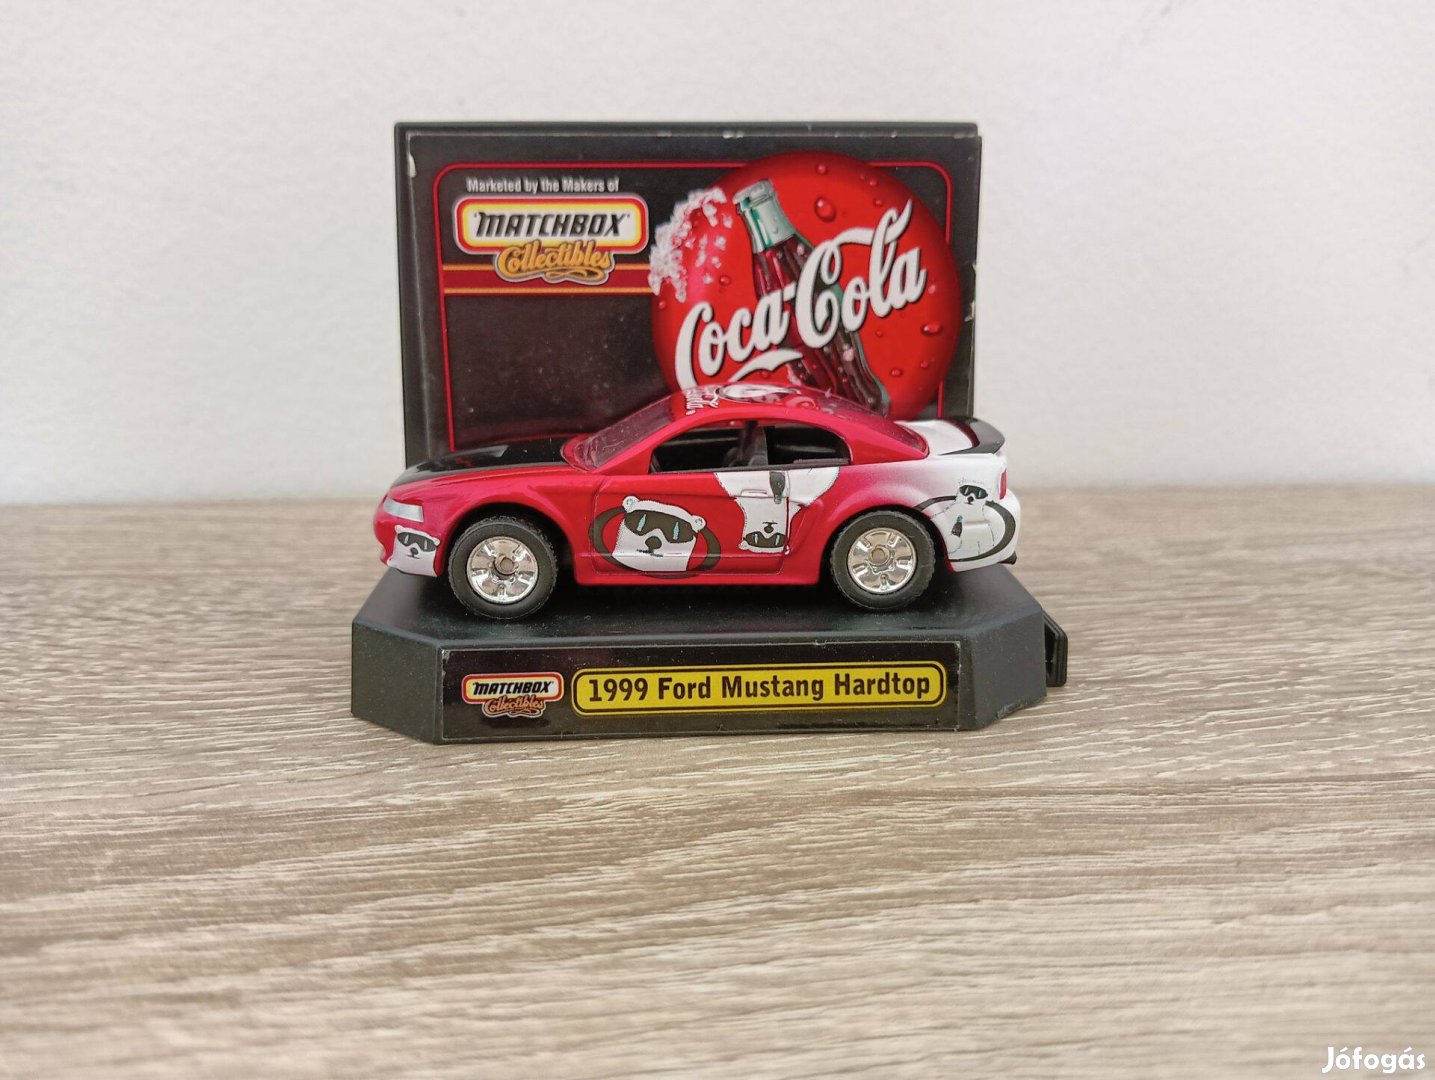 1999 Matchbox Coca Cola Diecast 1999 Ford Mustang Hardtop